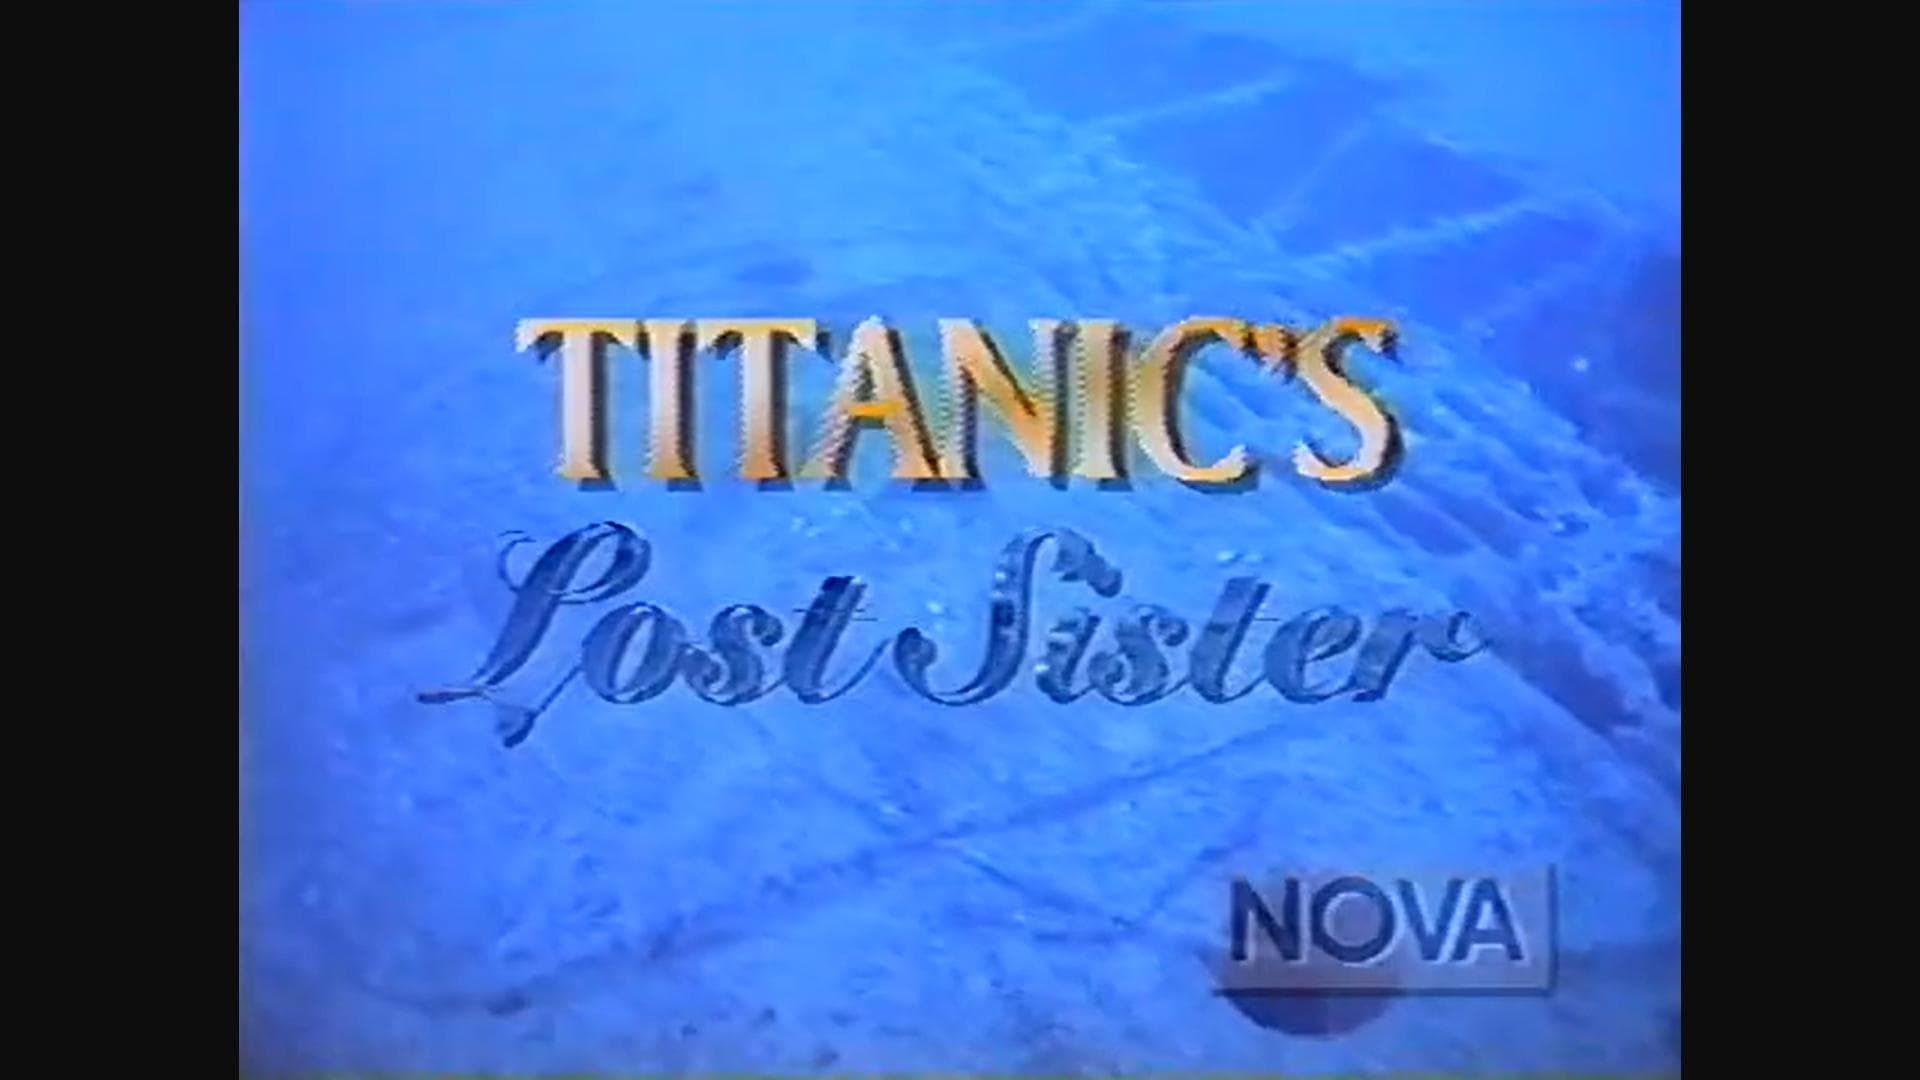 Titanic's Lost Sister background